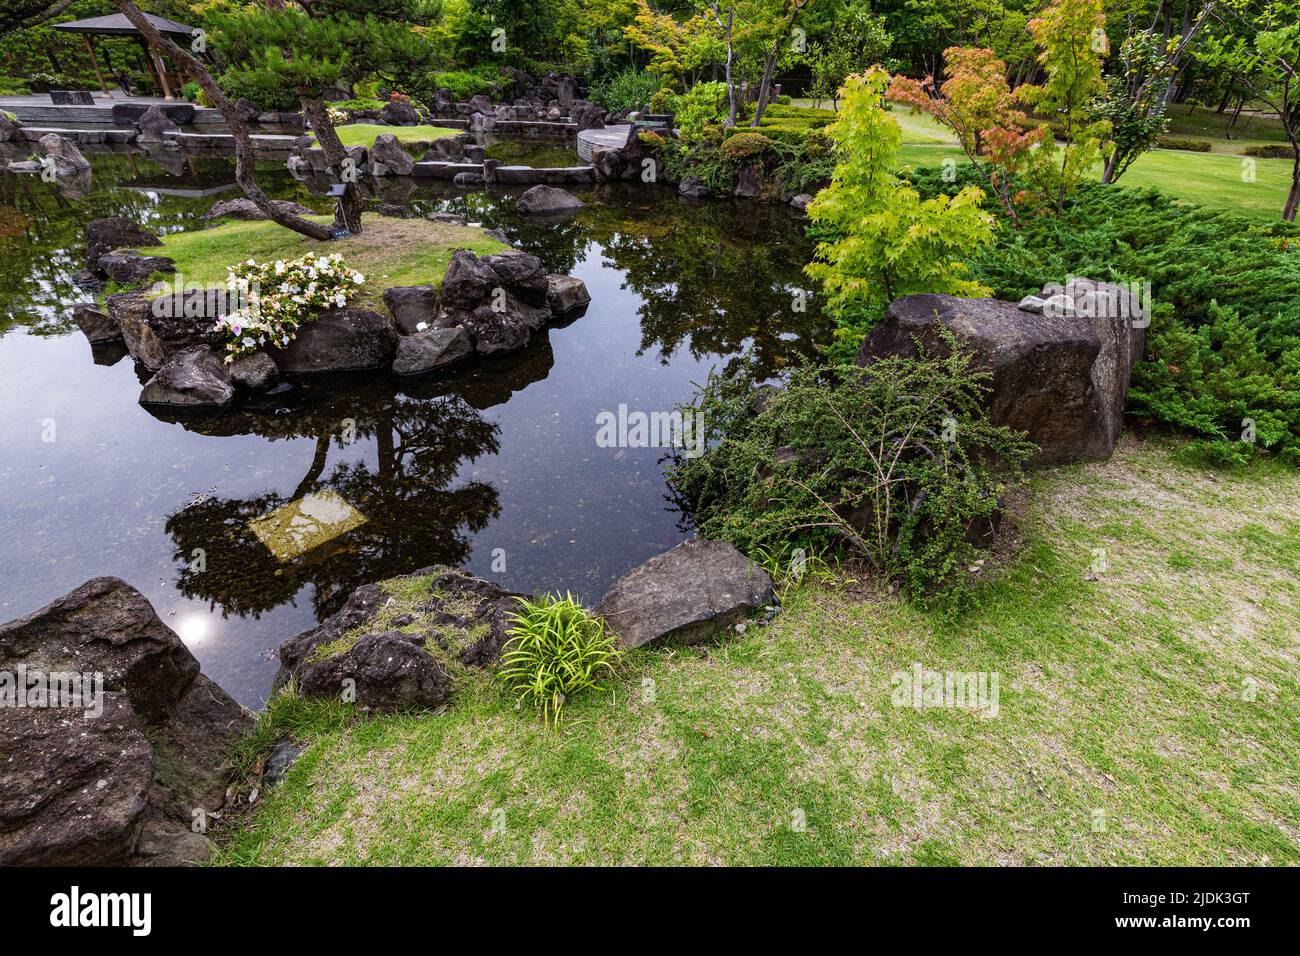 21st Century Memorial Park Hayama no Mori is adjacent to Hayama Park selected as one of the 100 Best Historical Parks in Japan.  There is a Japanese g Stock Photo